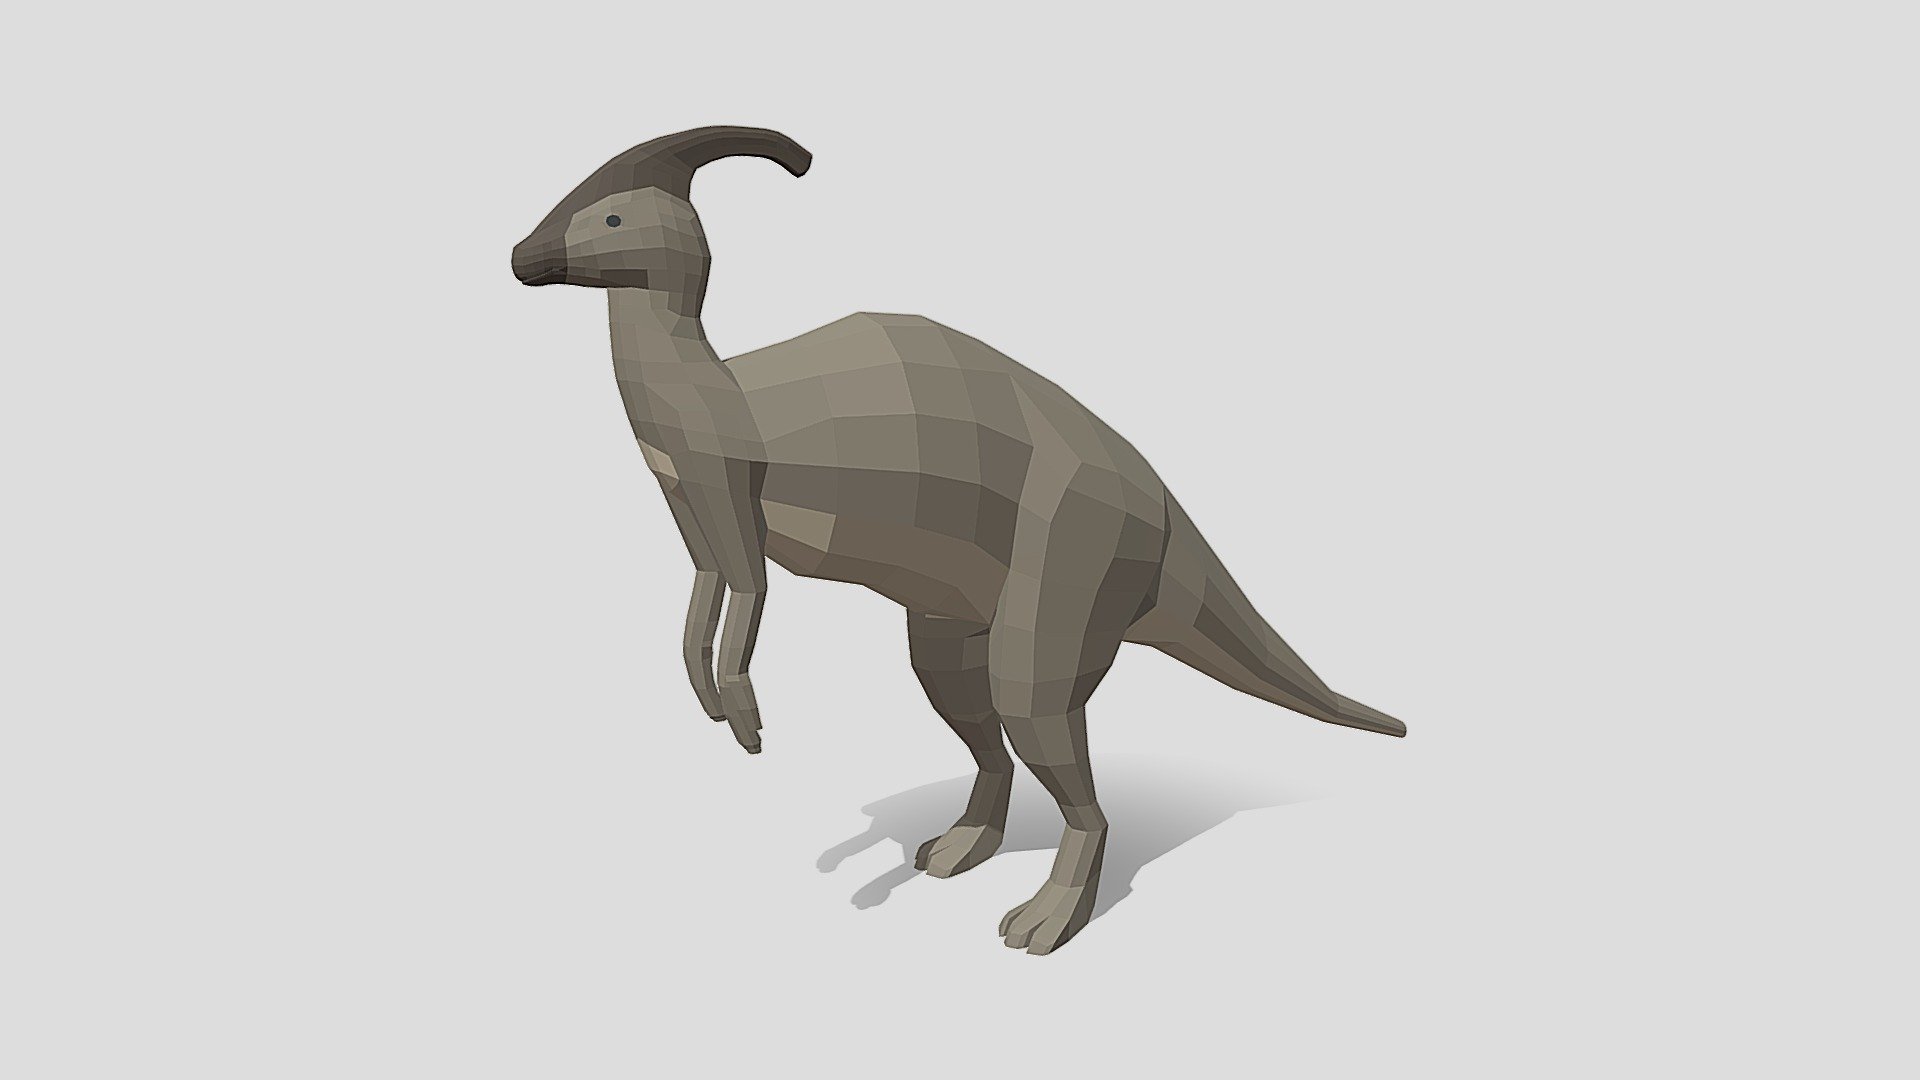 This is a low poly 3D model of a Parasaurolophus. The low poly dinosaur was modeled and prepared for low-poly style renderings, background, general CG visualization presented as a mesh with quads only.

Verts : 1.198 Faces: 1.196

The 3D model have simple materials with diffuse colors.

No ring, maps and no UVW mapping is available.

The original file was created in blender. You will receive a 3DS, OBJ, FBX, blend, DAE, Stl.

All preview images were rendered with Blender Cycles. Product is ready to render out-of-the-box. Please note that the lights, cameras, and background is only included in the .blend file. The model is clean and alone in the other provided files, centred at origin and has real-world scale 3d model